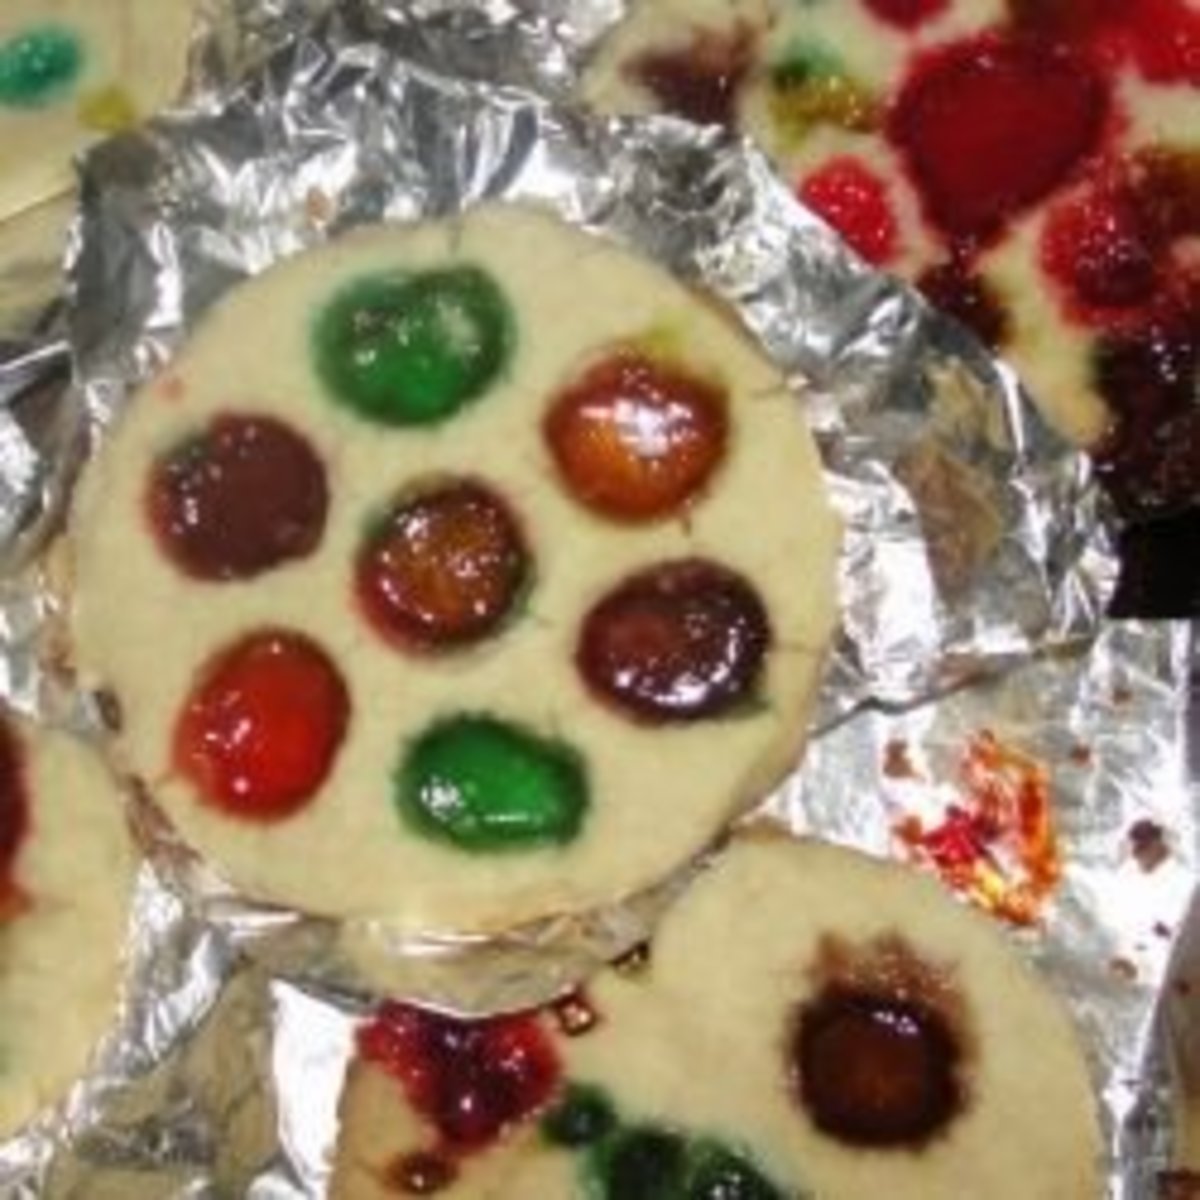 Stained glass window cookies